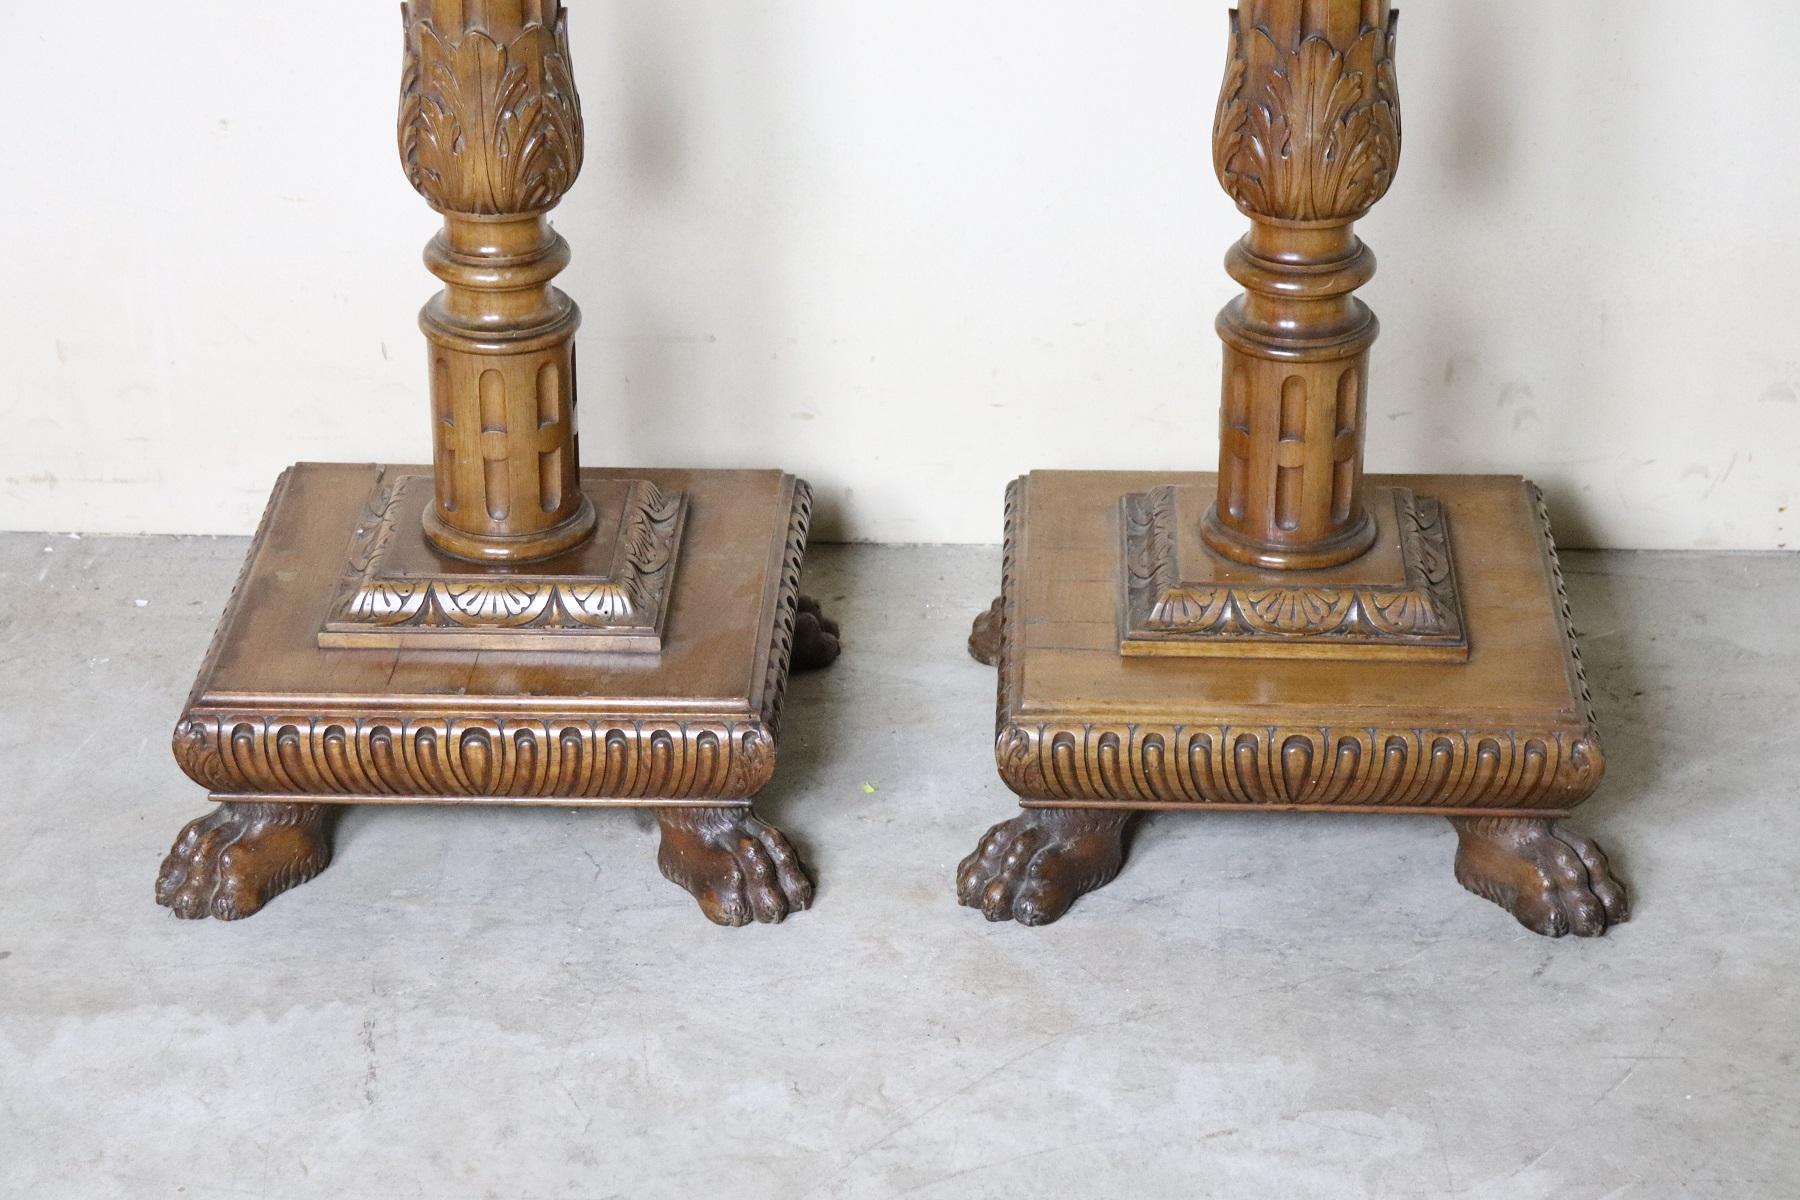 Rare pair of walnut wood columns with refined Renaissance-style carving. Special foot-shaped feet. The columns are of rare beauty in the upper part of the capital carved with acanthus leaves. The whole body of the column presents refined carving.